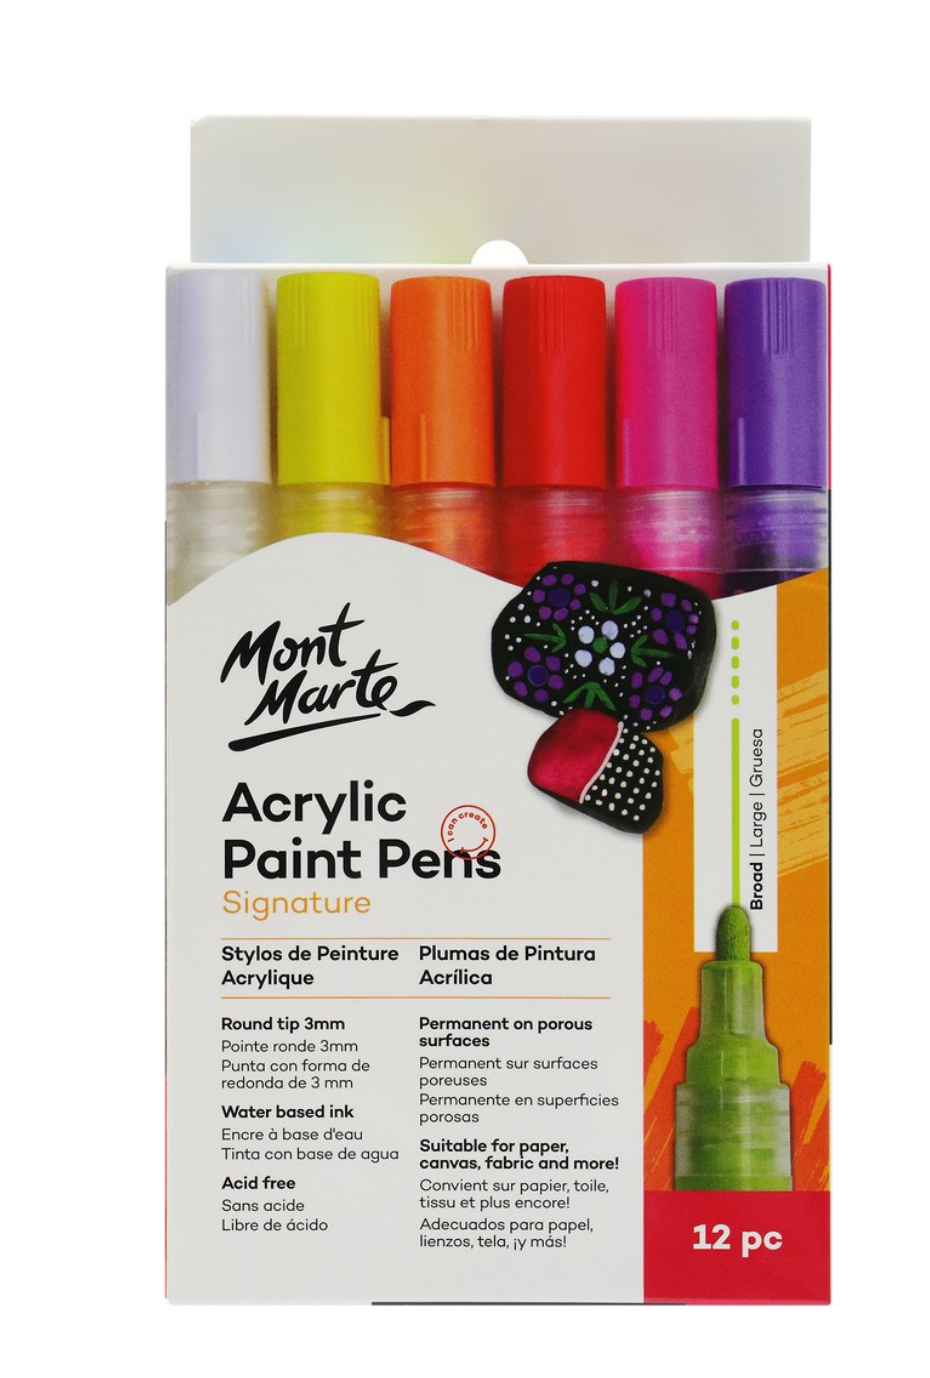 Acrylic Paint Storage Tip - Strathmore Artist Papers